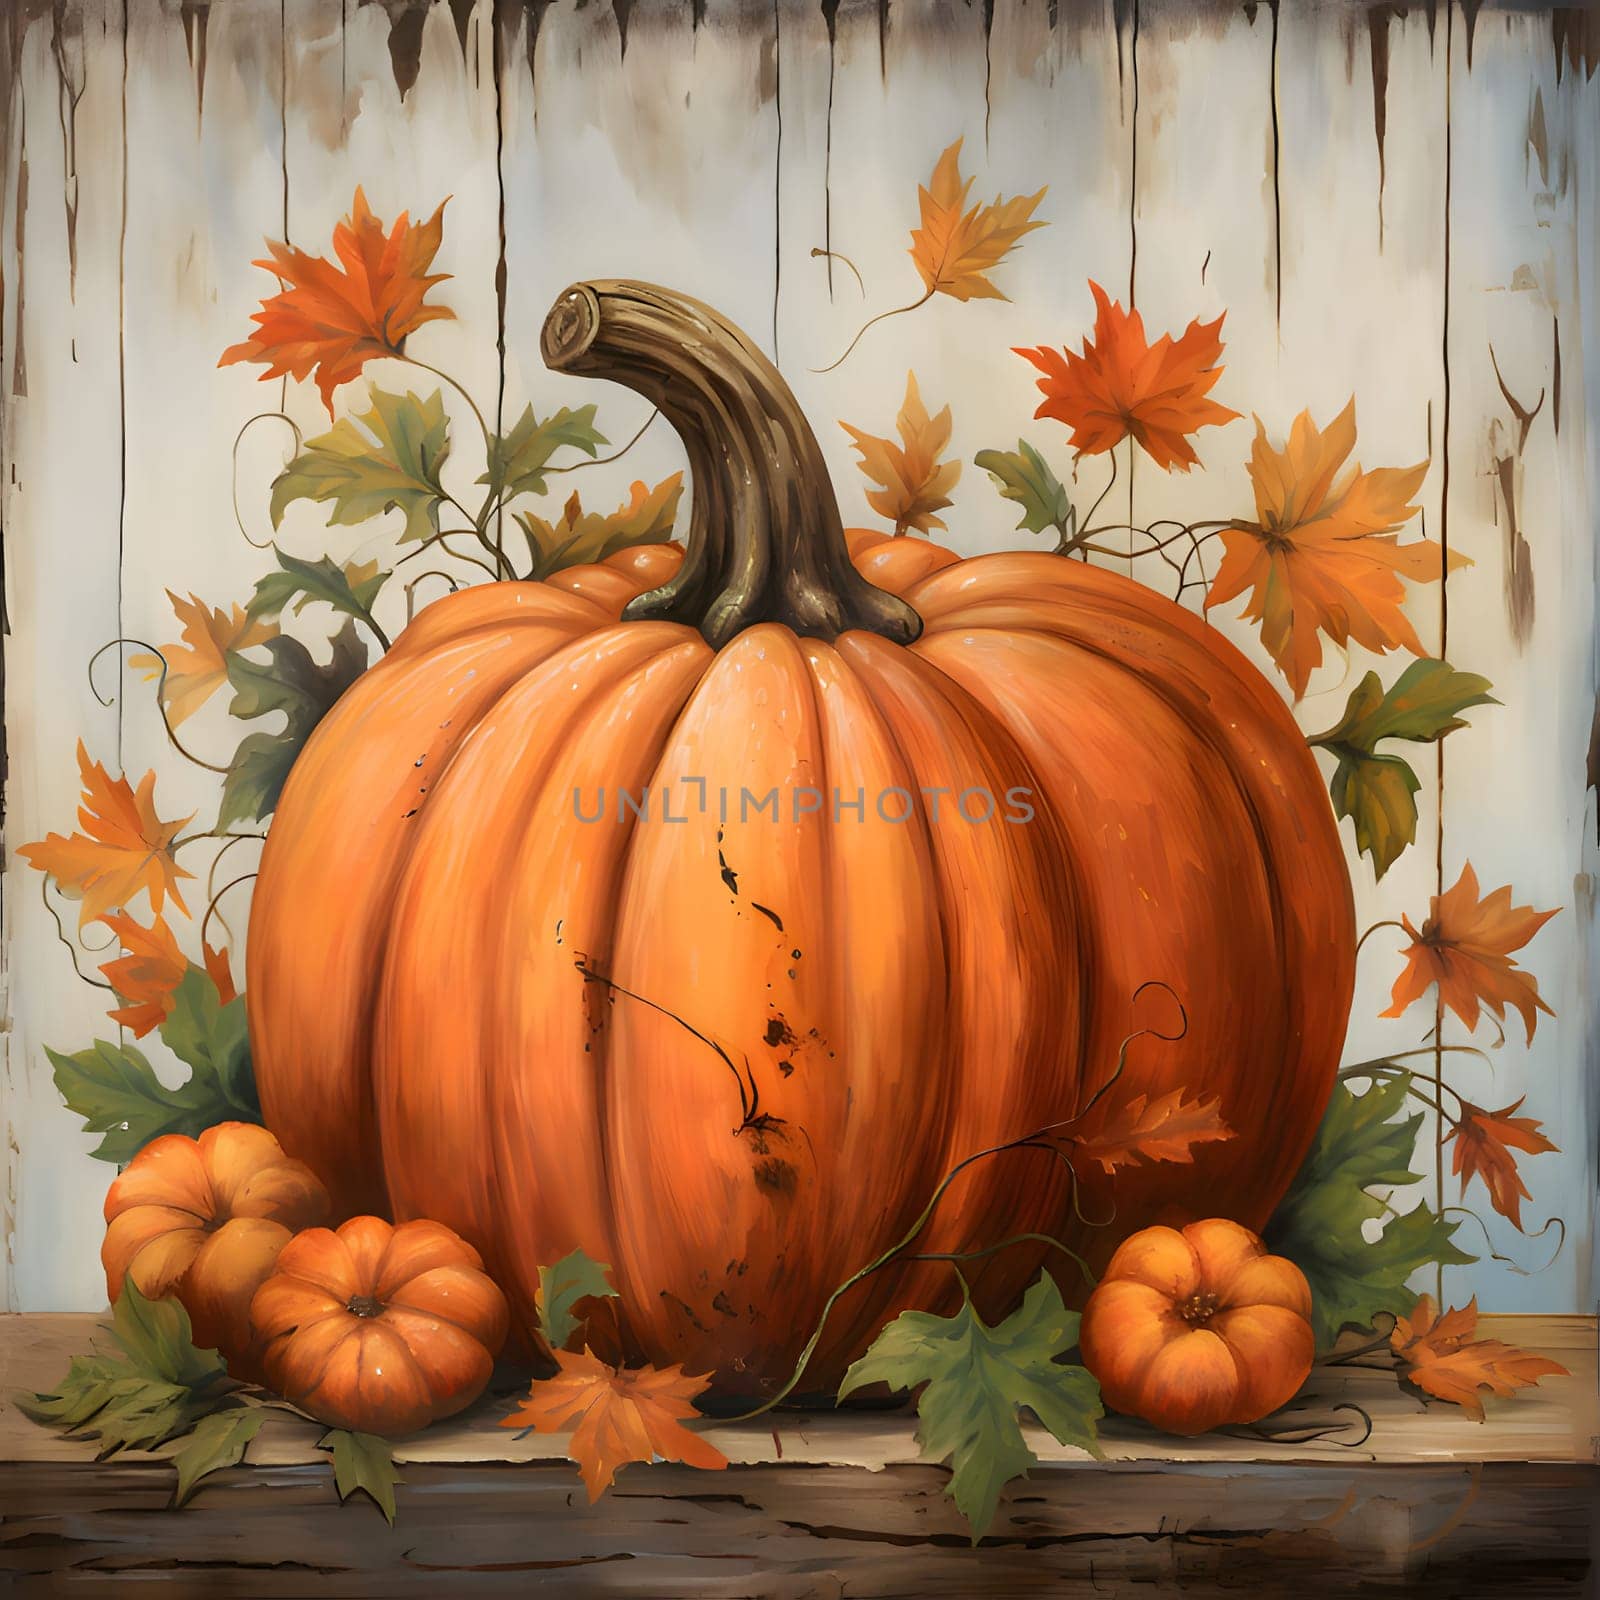 Illustration; large pumpkin with smaller ones, leaves on wooden background. Pumpkin as a dish of thanksgiving for the harvest. An atmosphere of joy and celebration.